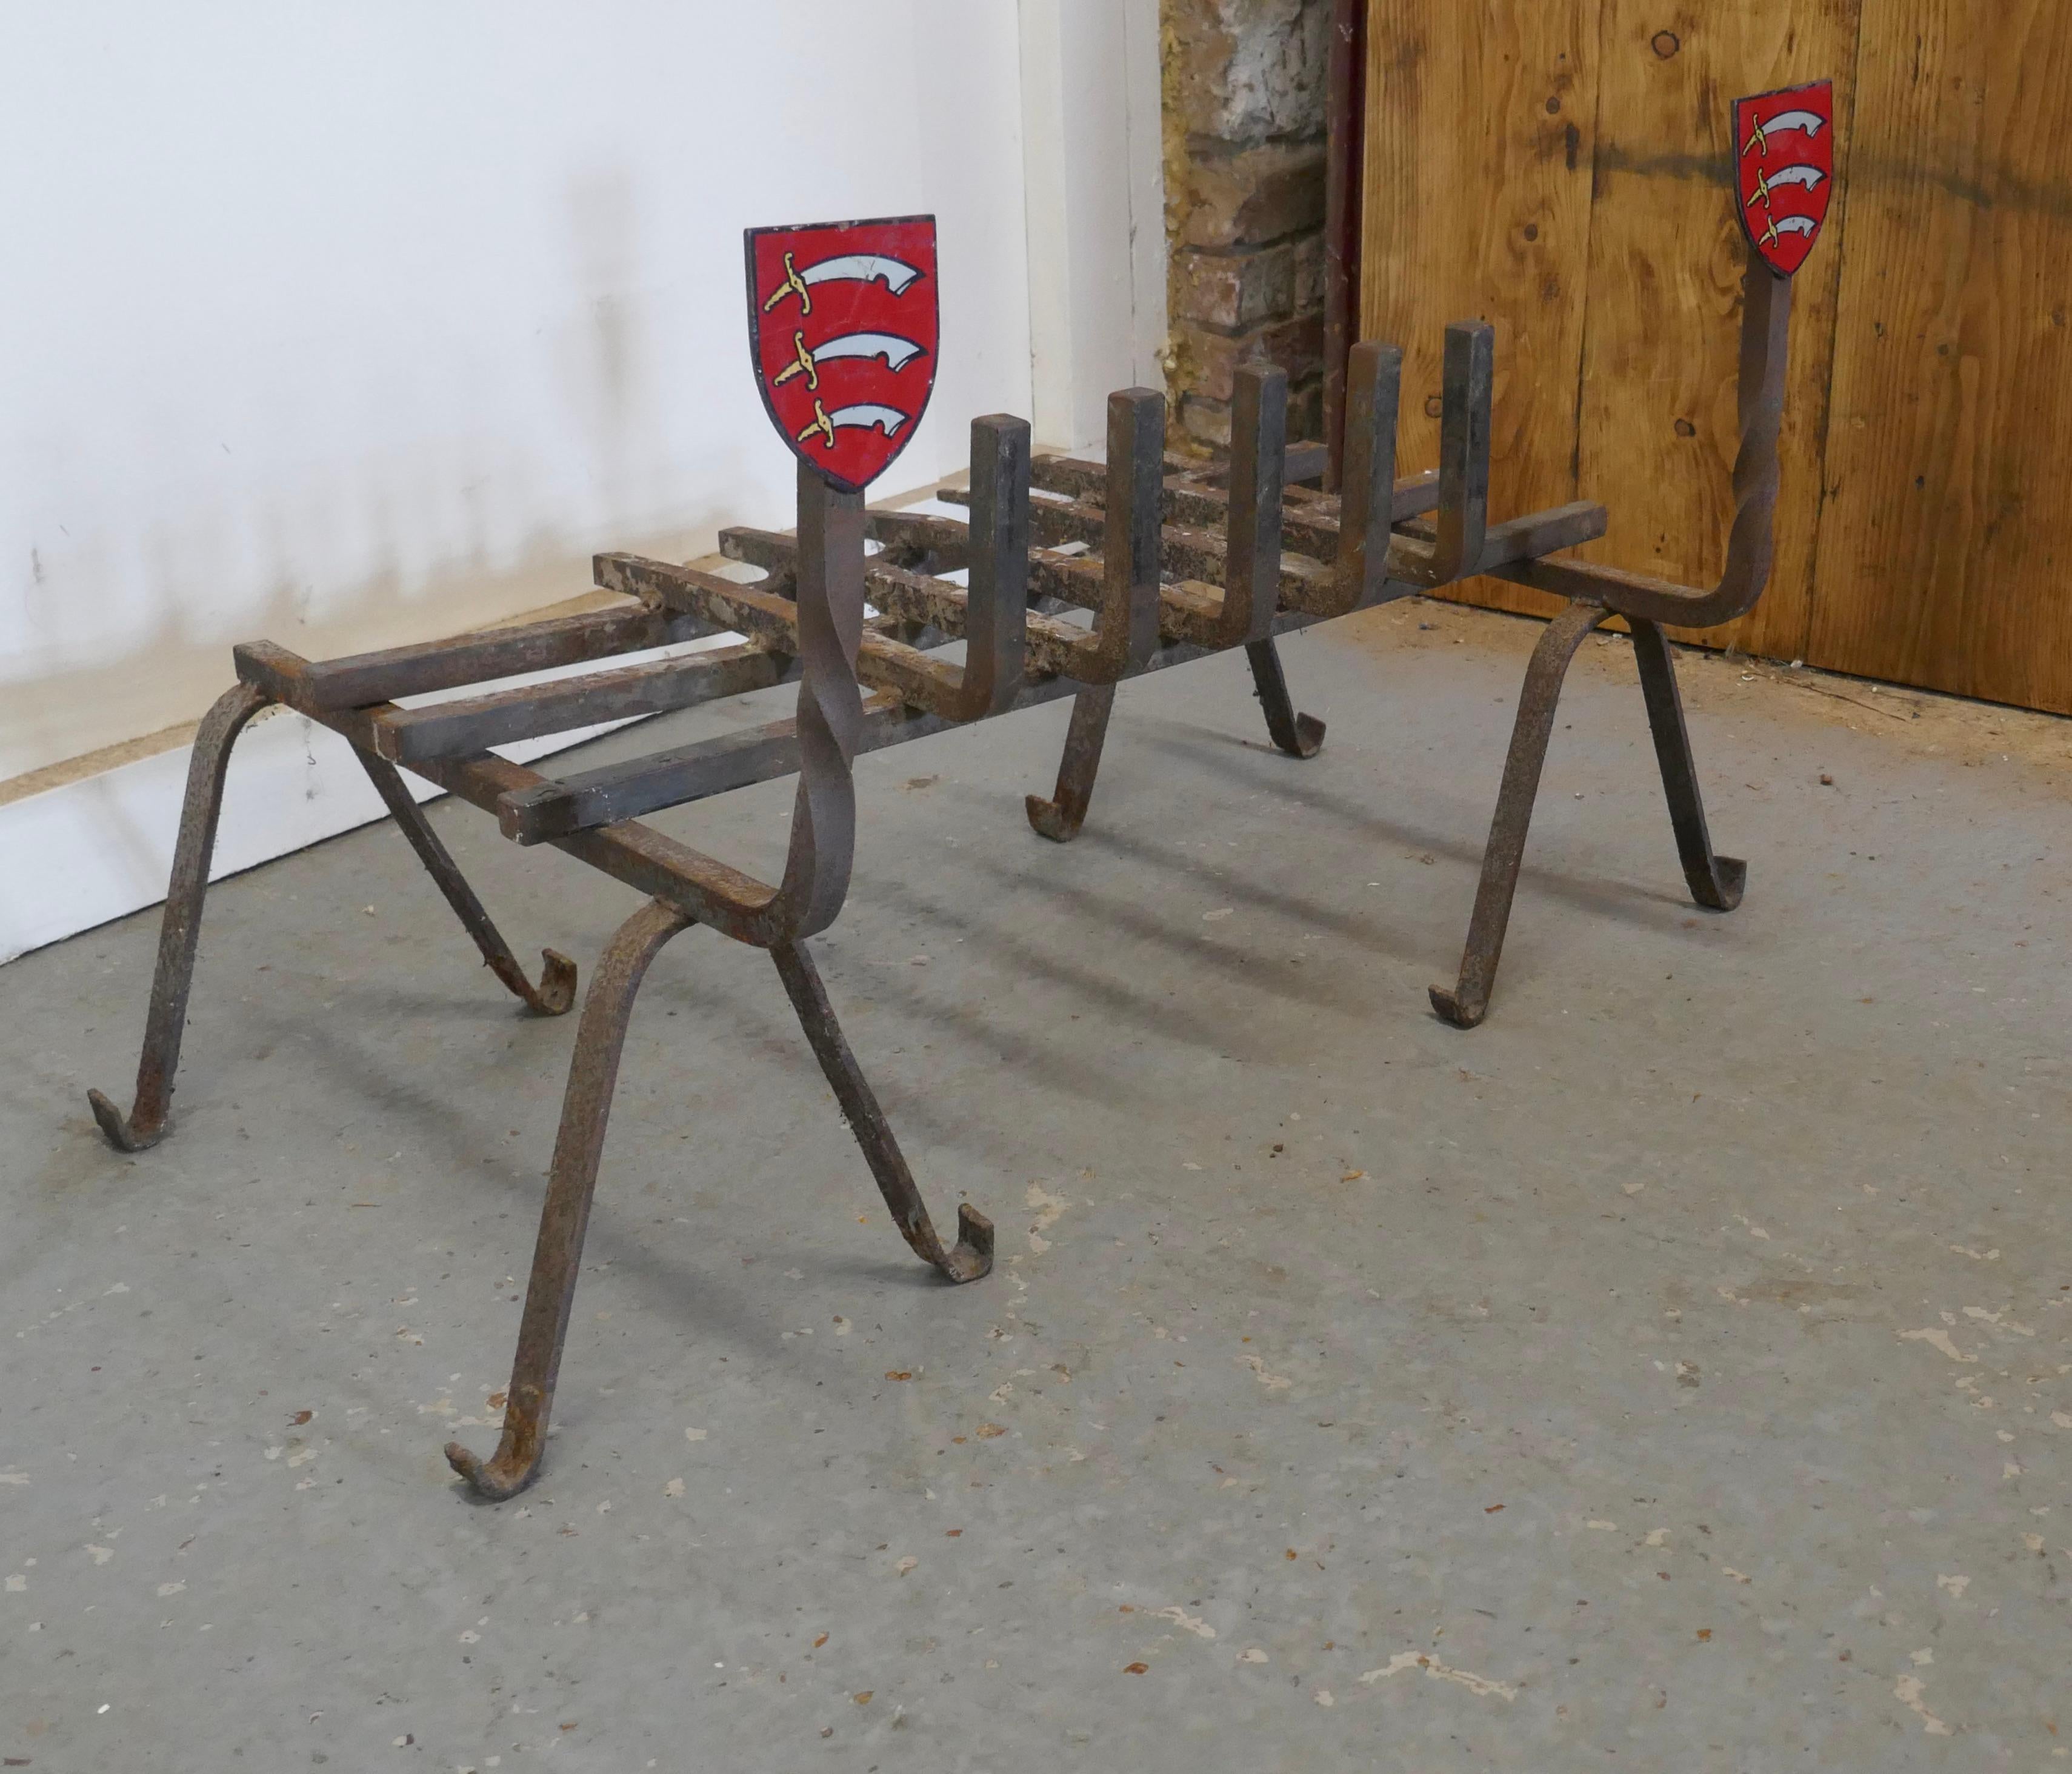 Large 19th century fire grate set with Essex Shield iron andirons 

This is a large fire grate set on Crested Andirons, the enamel crests are the Coat of Arms of Essex in England
Wonderful large pieces in sound condition
The Dogs are 21” high,